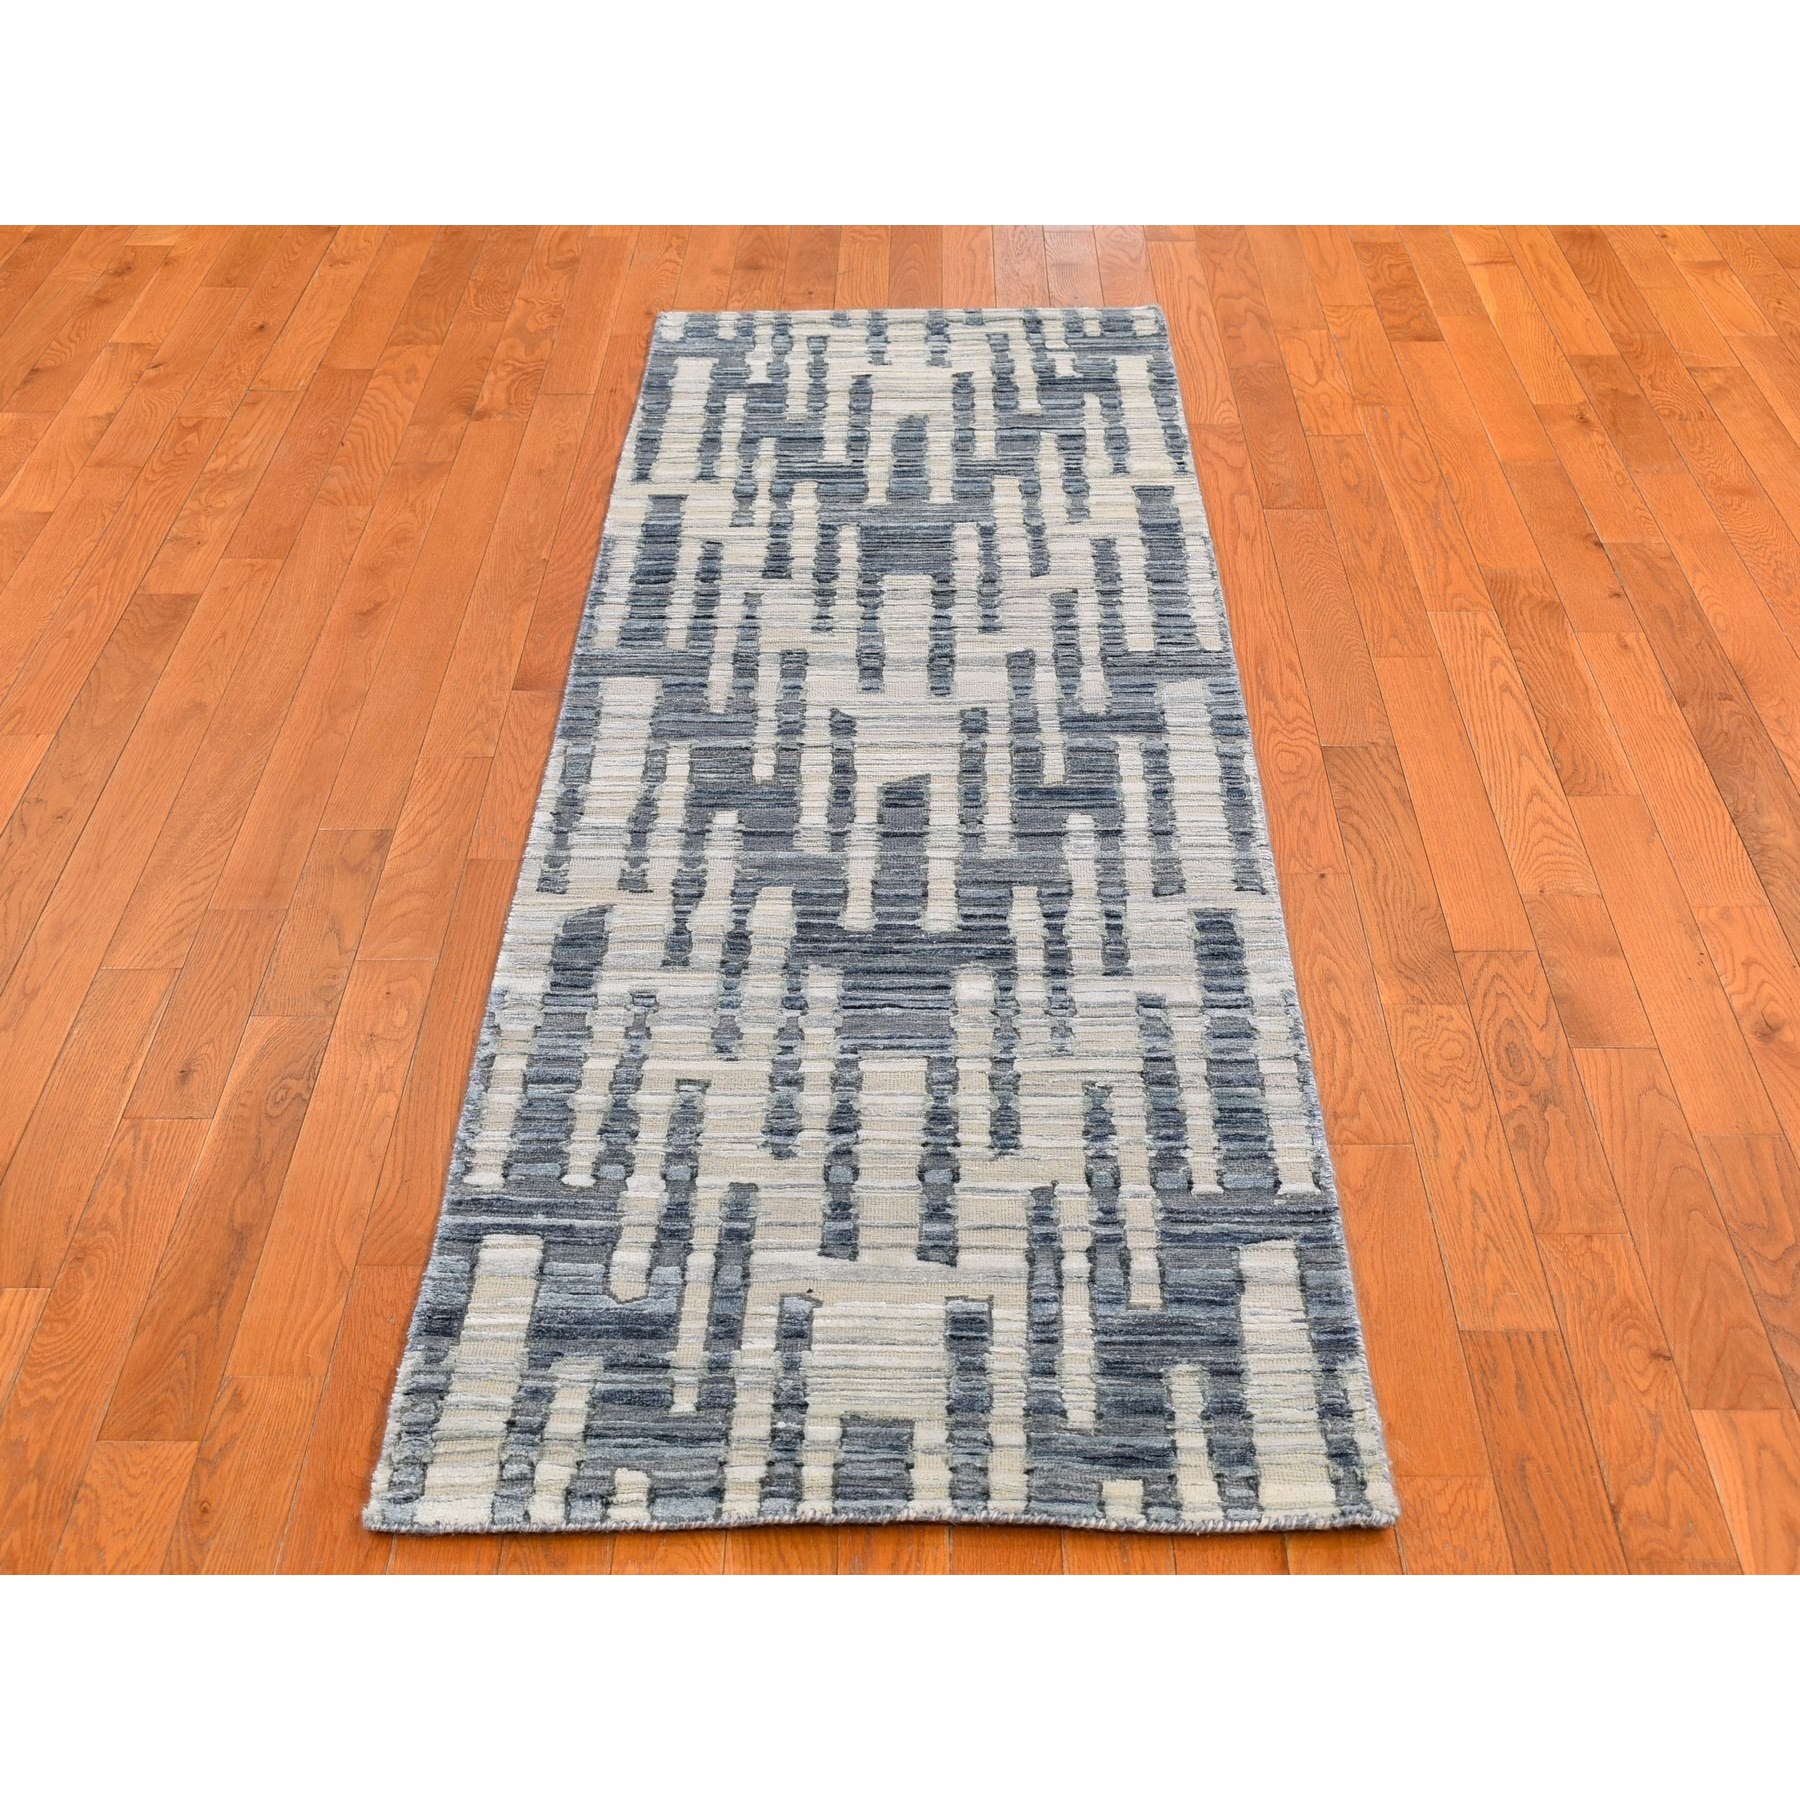 2'6"x8'3" Blue Pure Silk and Textured Wool Wide Runner Zigzag with Graph Design Hand Woven Oriental Rug 